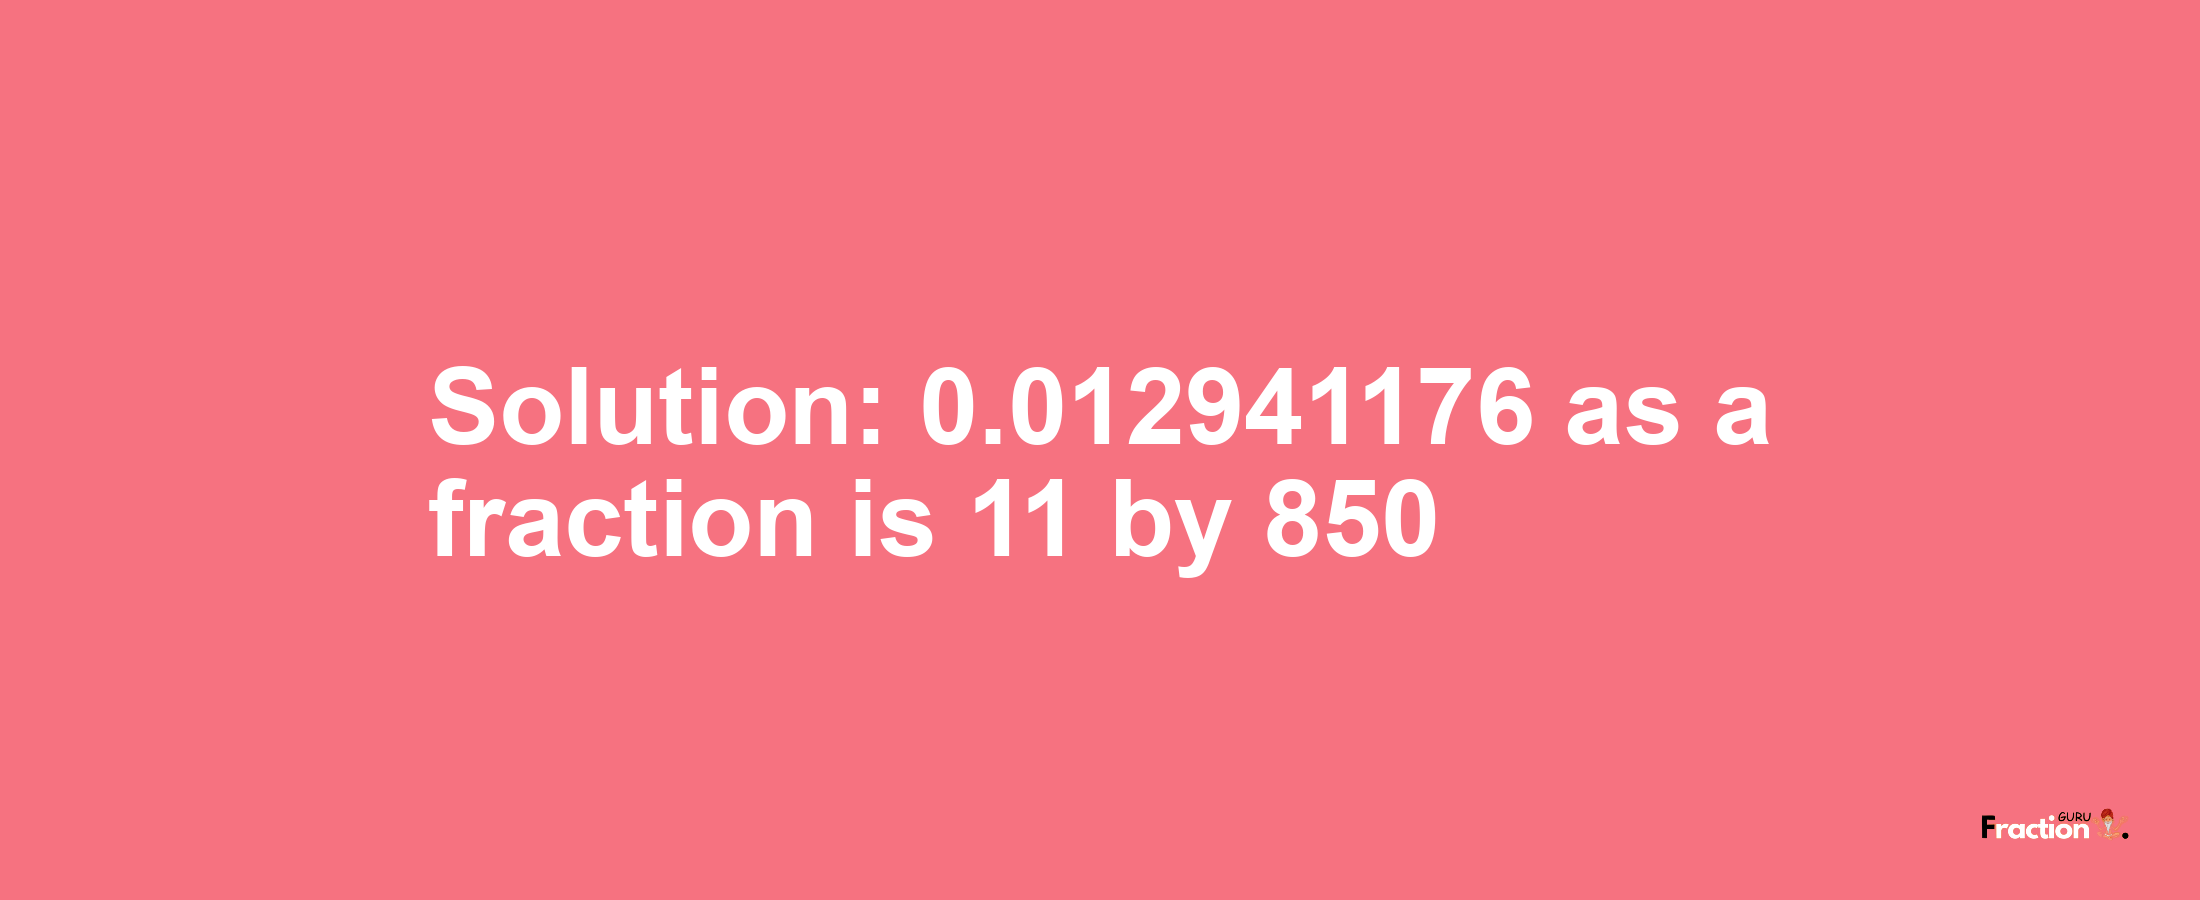 Solution:0.012941176 as a fraction is 11/850